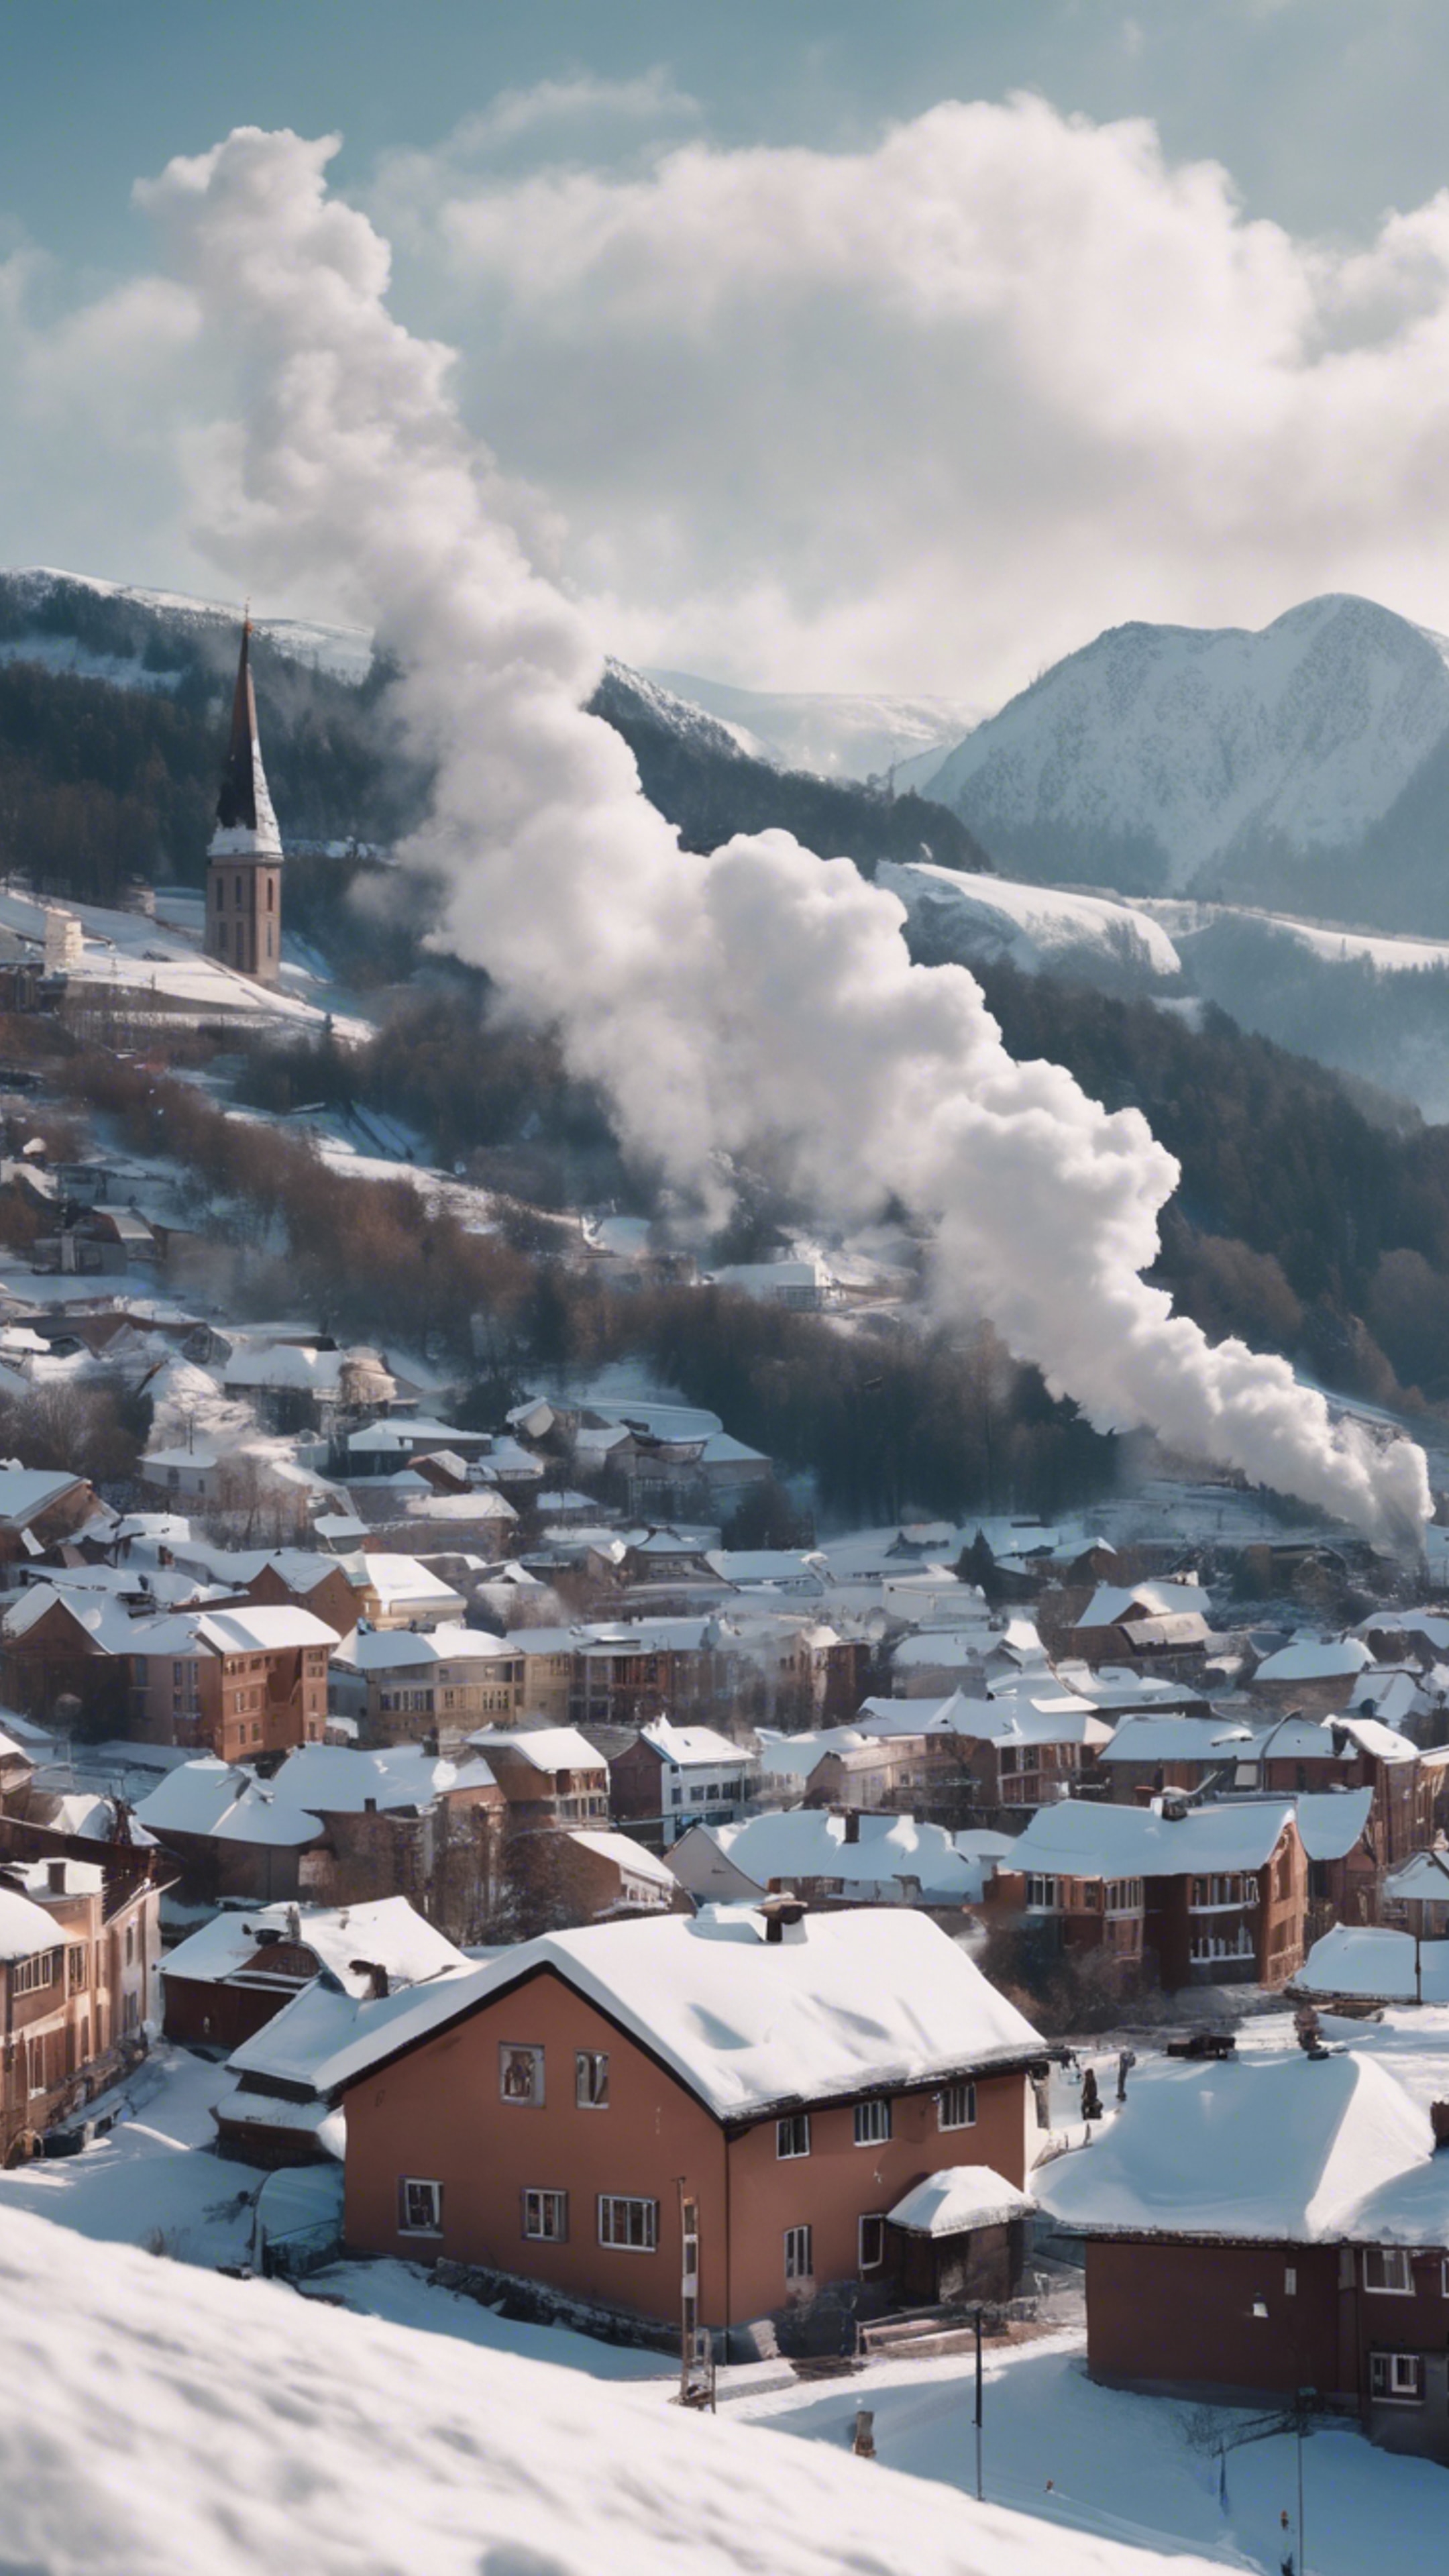 A panoramic view of a small town, its roofs covered in snow and smoke spiraling out of the chimneys, nestled at the base of a snow-covered mountain. Wallpaper[52cc39a879944283930e]